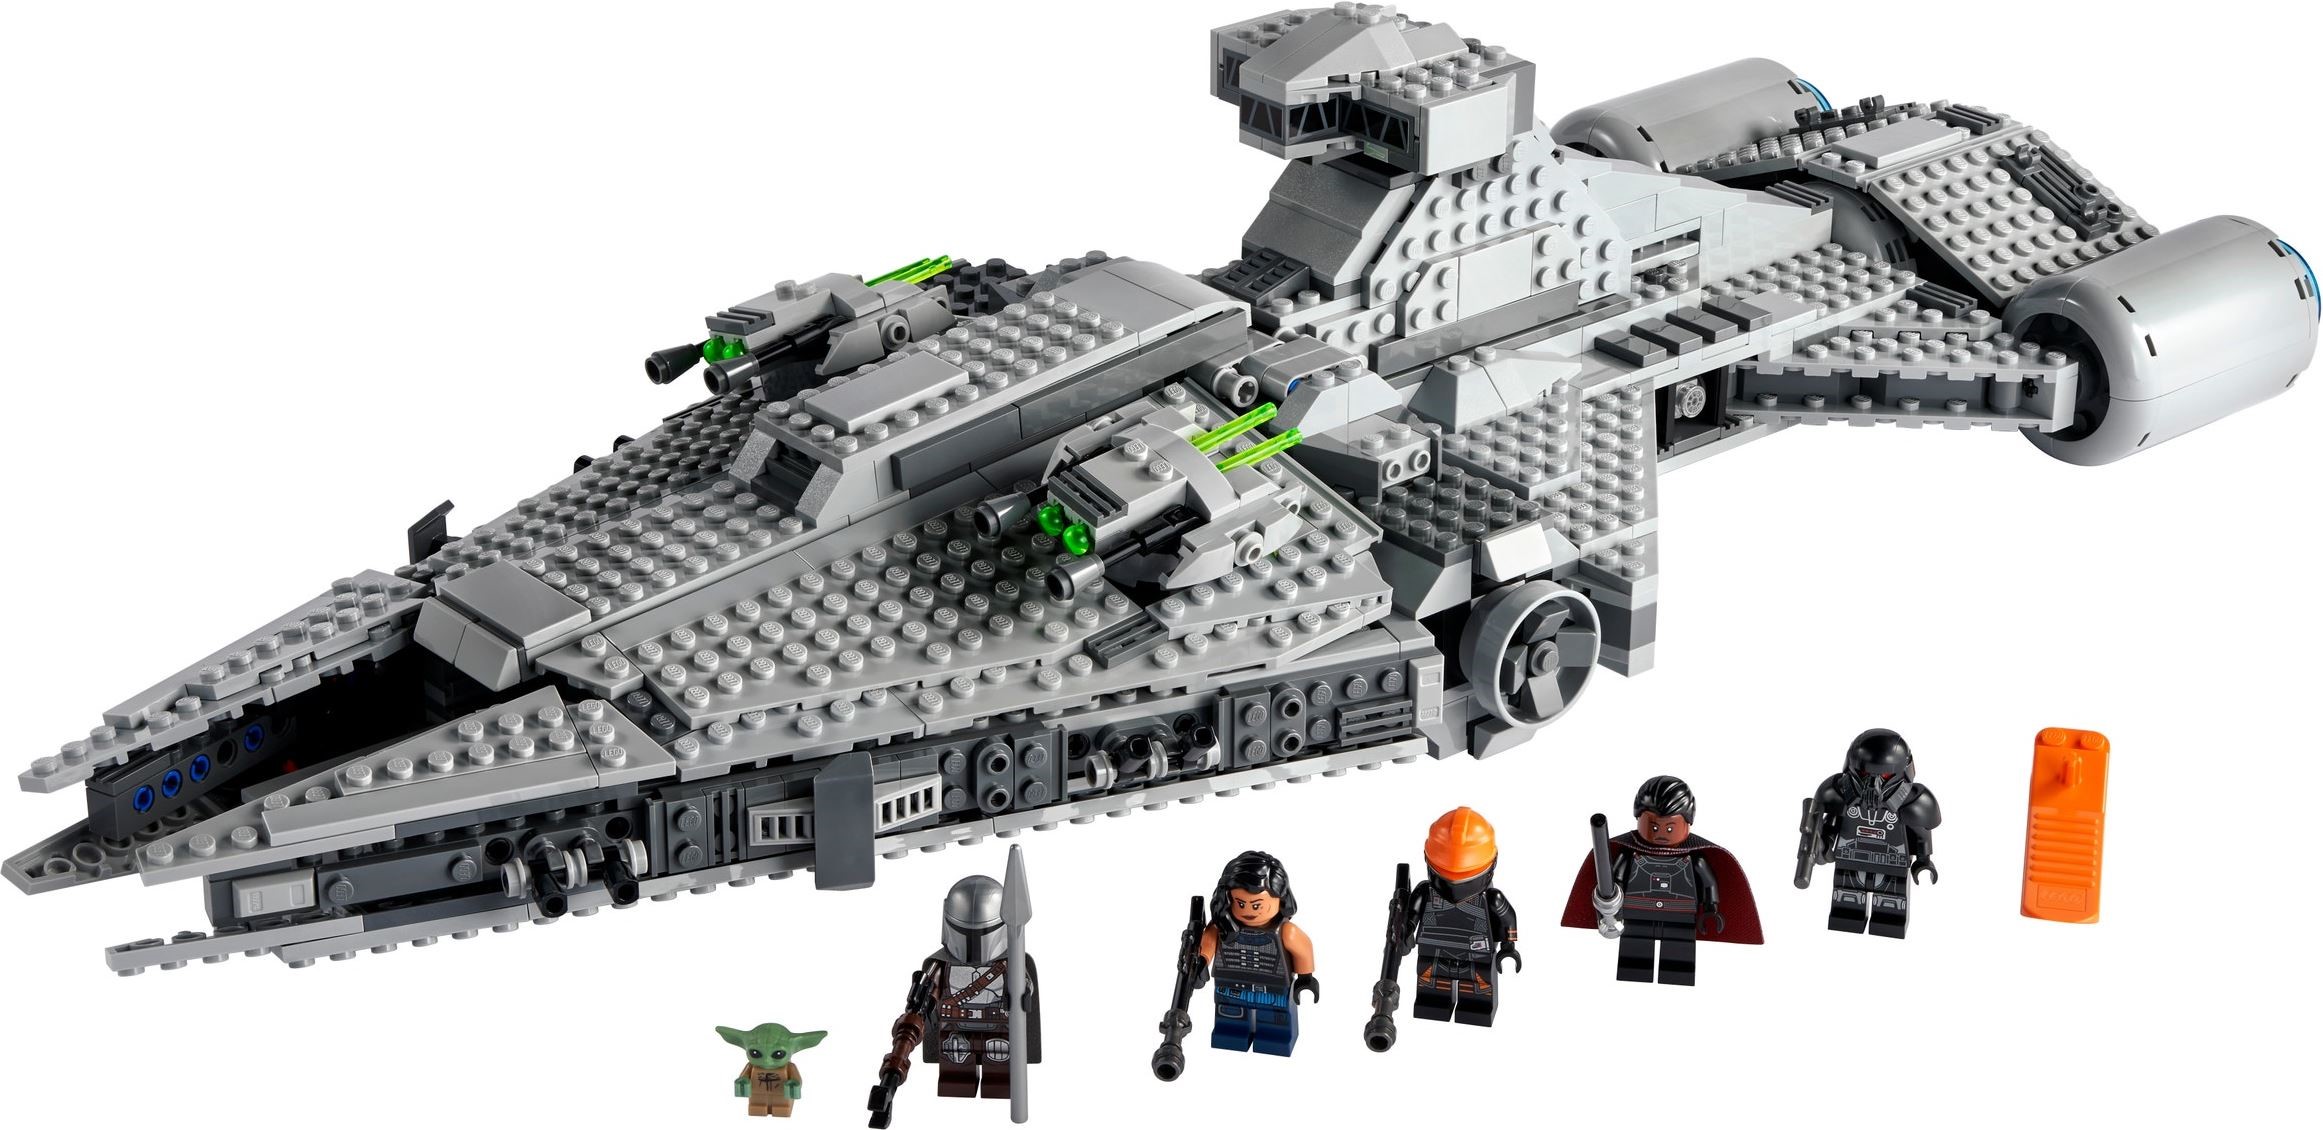 Shop All of the Star Wars Lego Sets That Came Out in 2021